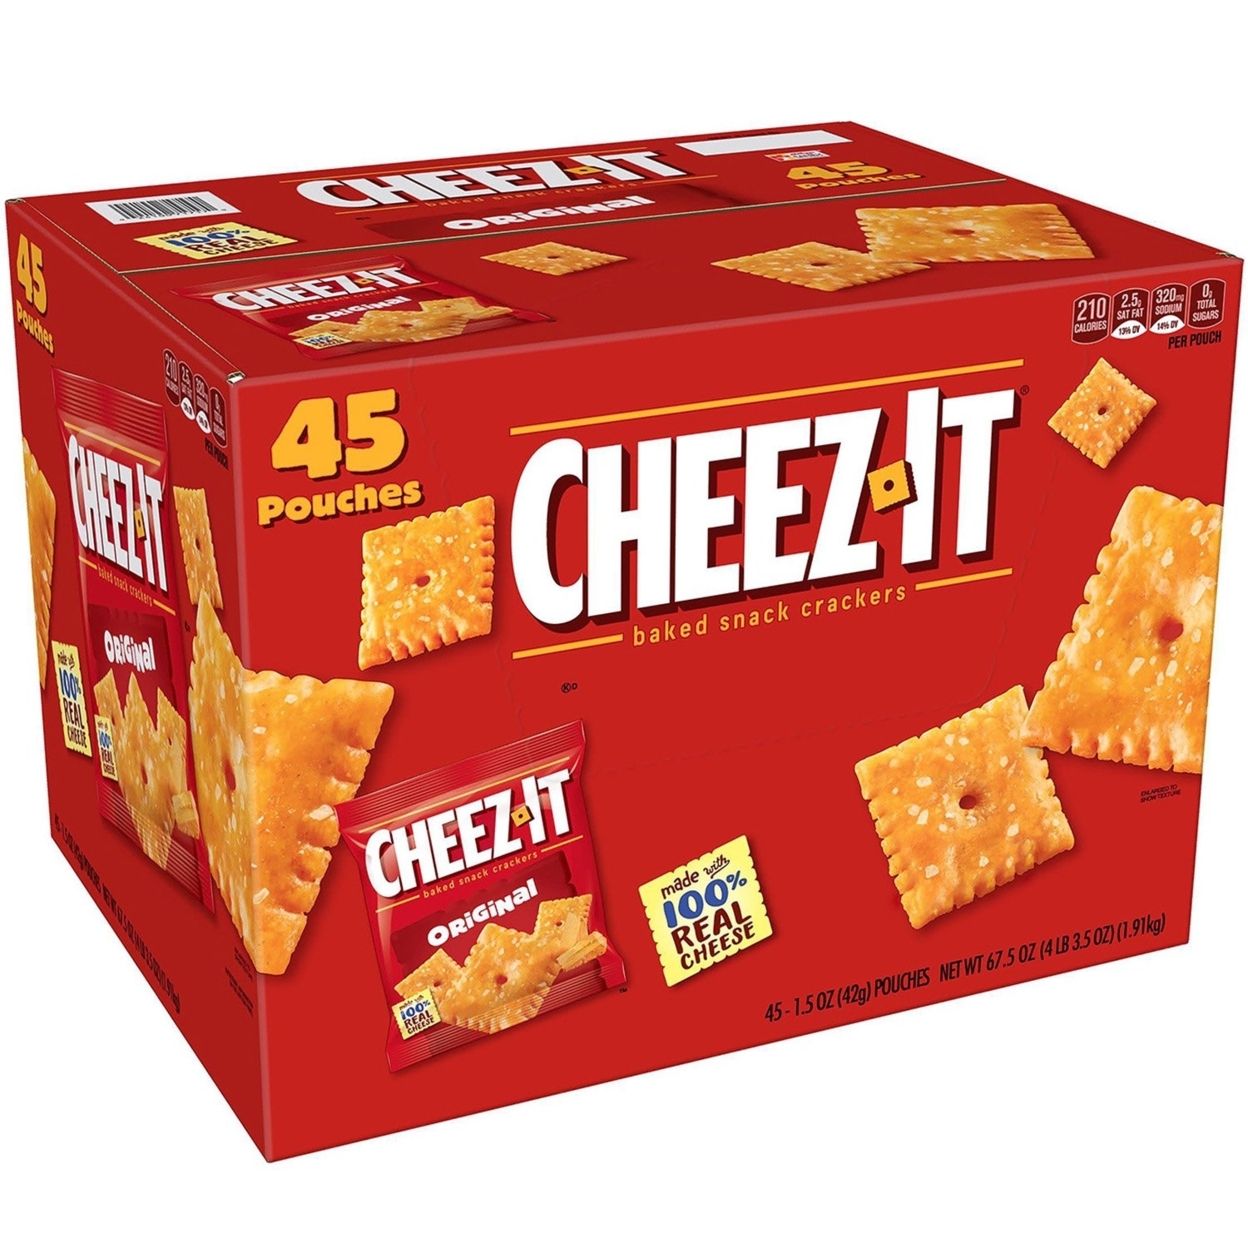 Cheez-It Original Crackers Snack Packs (1.5 Ounce, 45 Count)